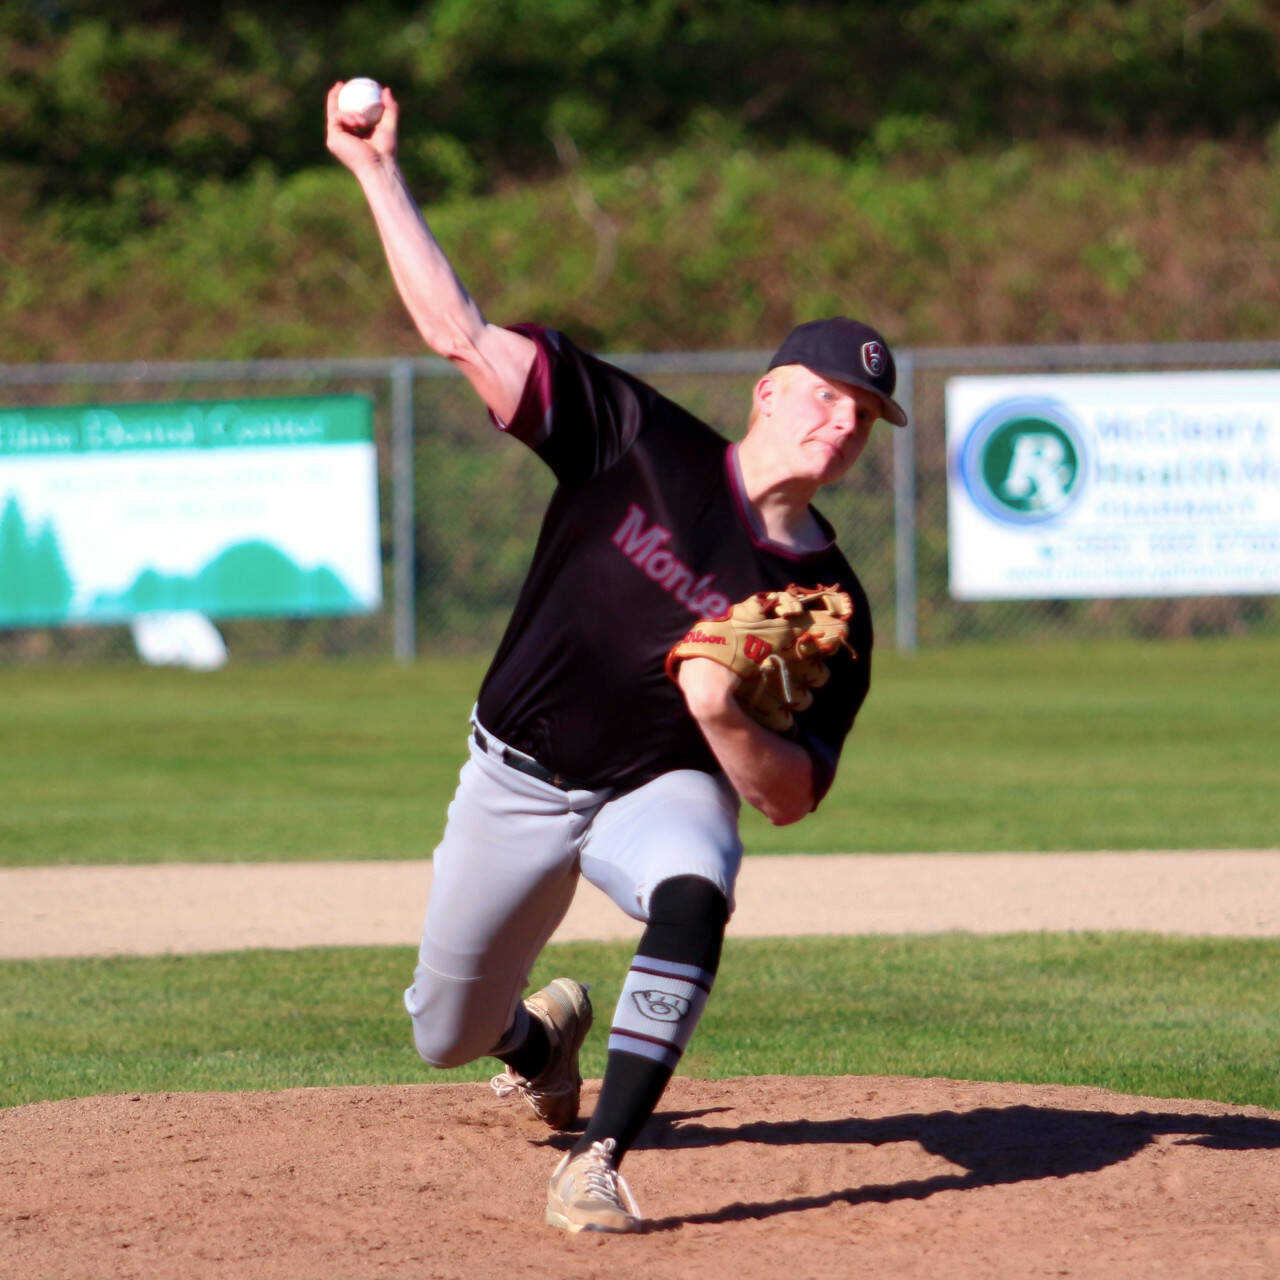 RYAN SPARKS | THE DAILY WORLD Montesano pitcher Cam Taylor earned the victory in a 13-0 win over Elma on Tuesday at Eagle Field in Elma.